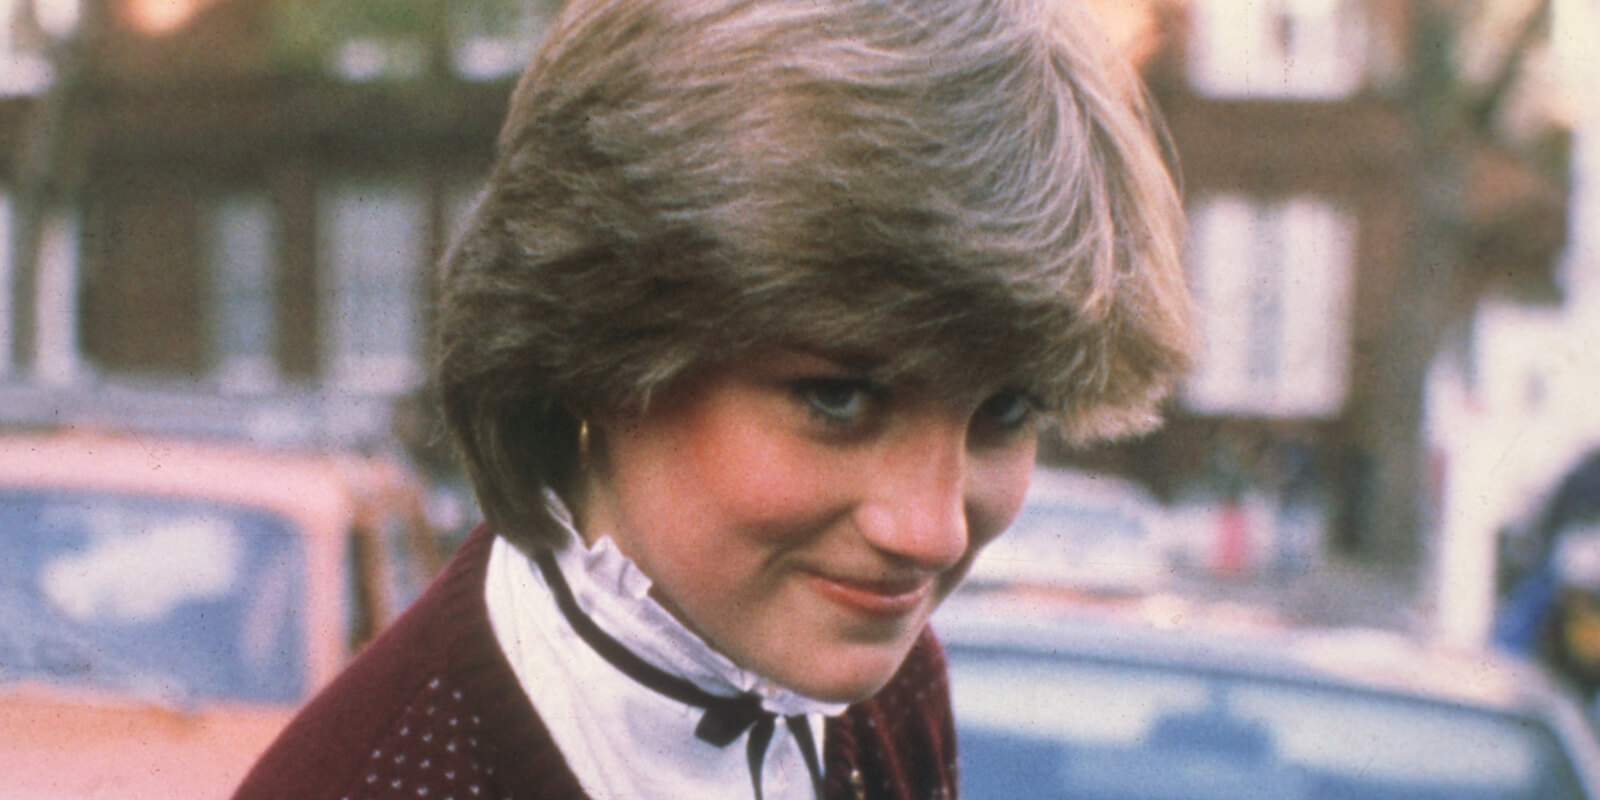 Princess Diana leaving her flat at Coleherne Court in Earl's Court, London, 12th November 1980.